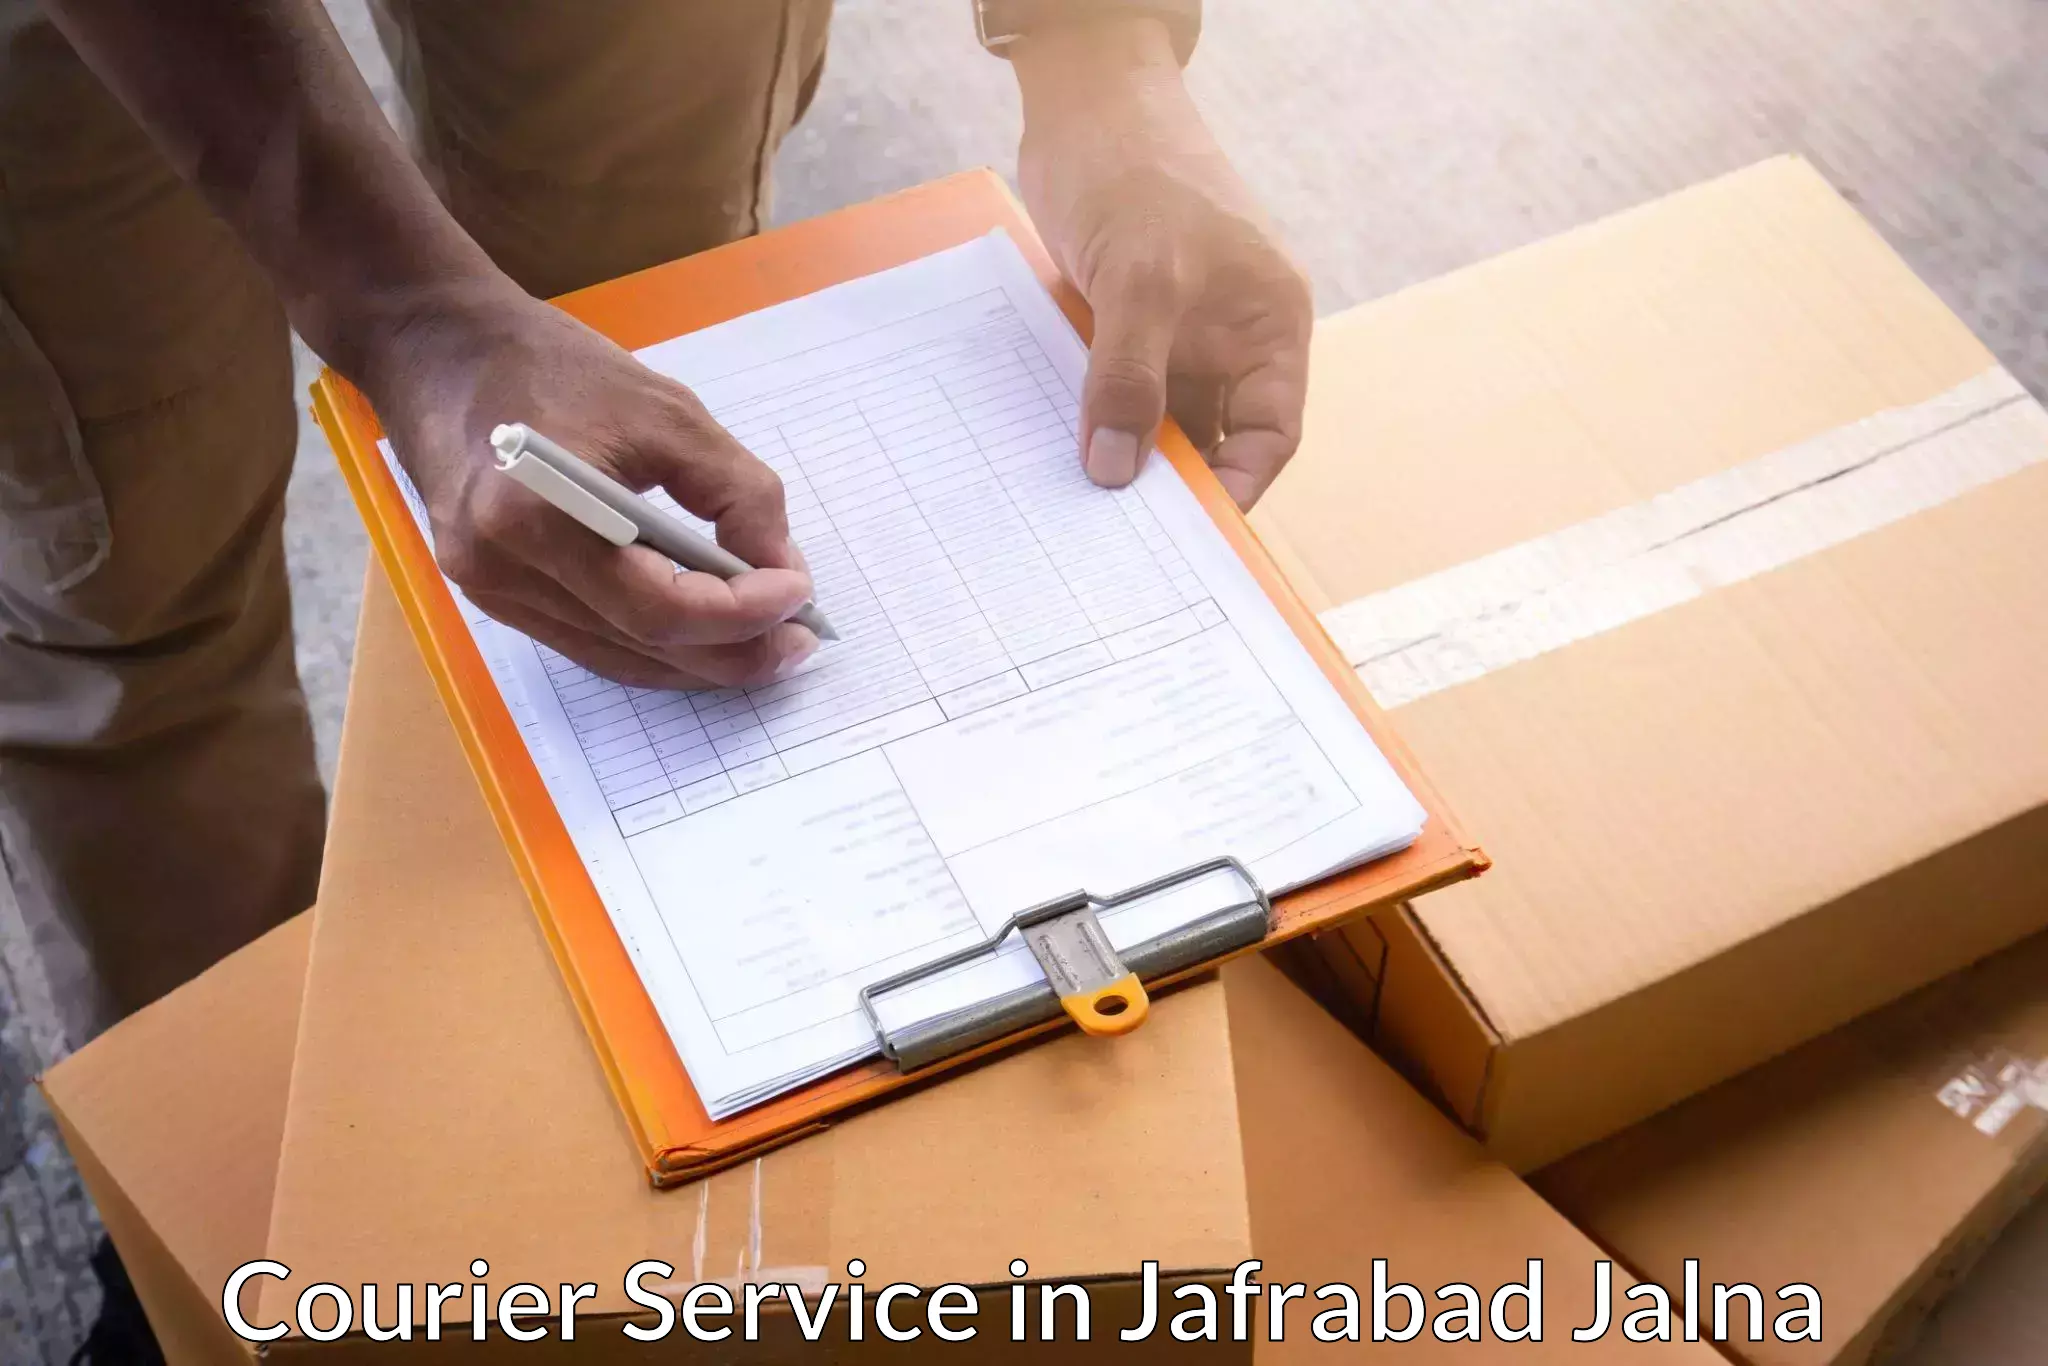 Enhanced delivery experience in Jafrabad Jalna